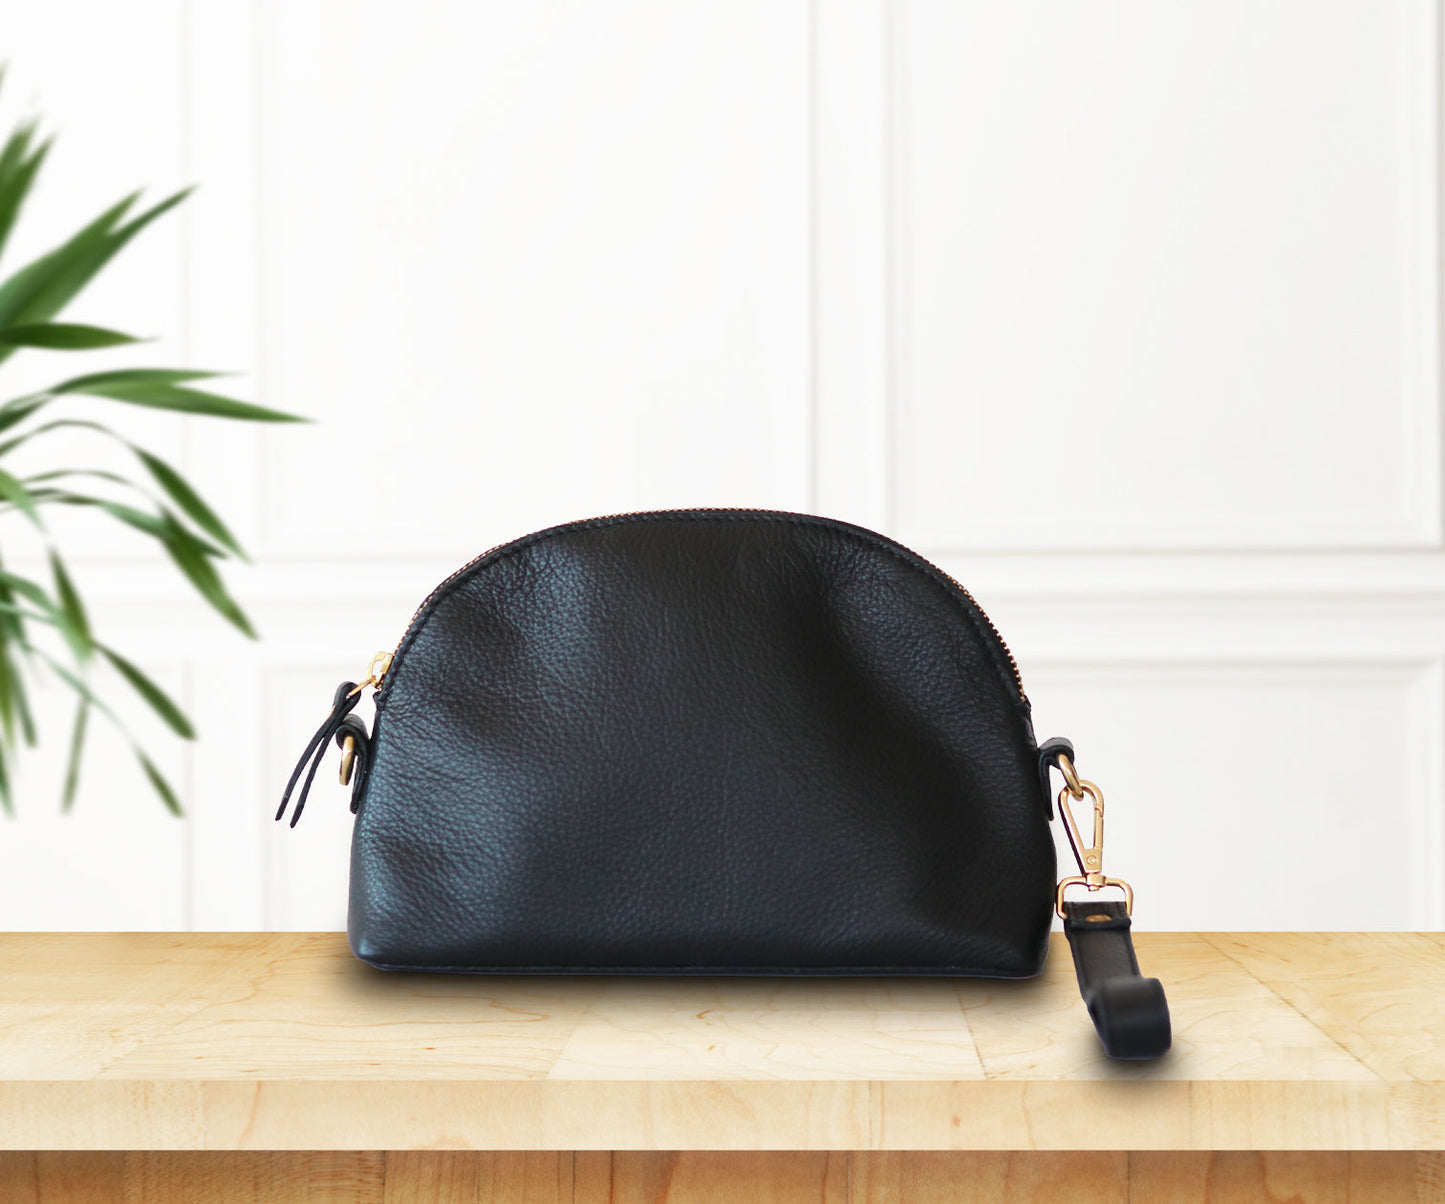 Black Leather Makeup Bag • Handcrafted in the USA